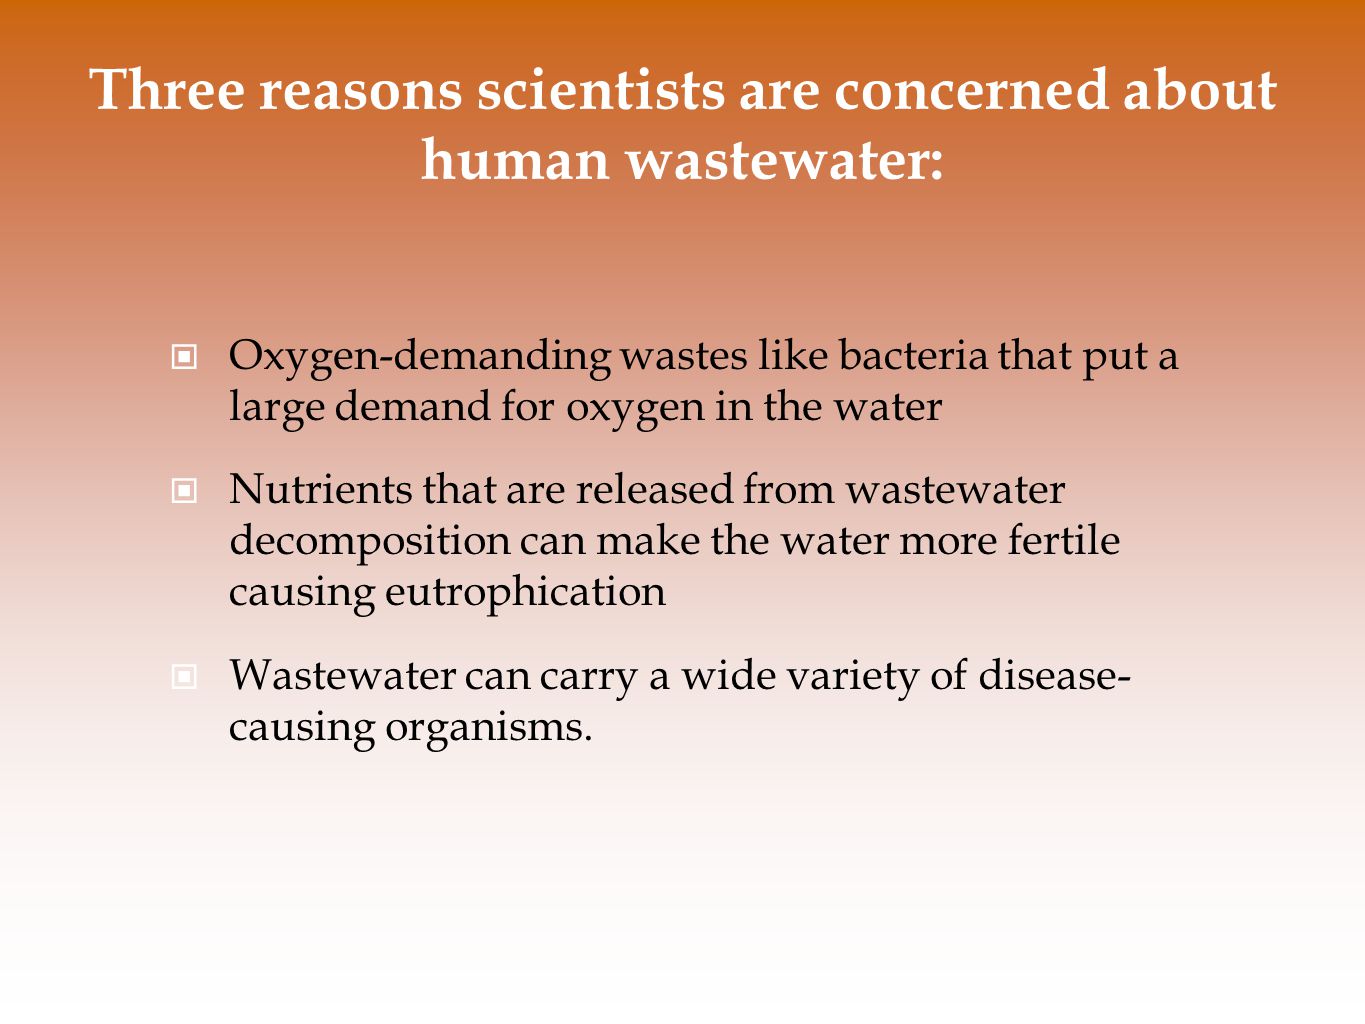 Three reasons scientists are concerned about human wastewater: Oxygen-demanding wastes like bacteria that put a large demand for oxygen in the water Nutrients that are released from wastewater decomposition can make the water more fertile causing eutrophication Wastewater can carry a wide variety of disease- causing organisms.